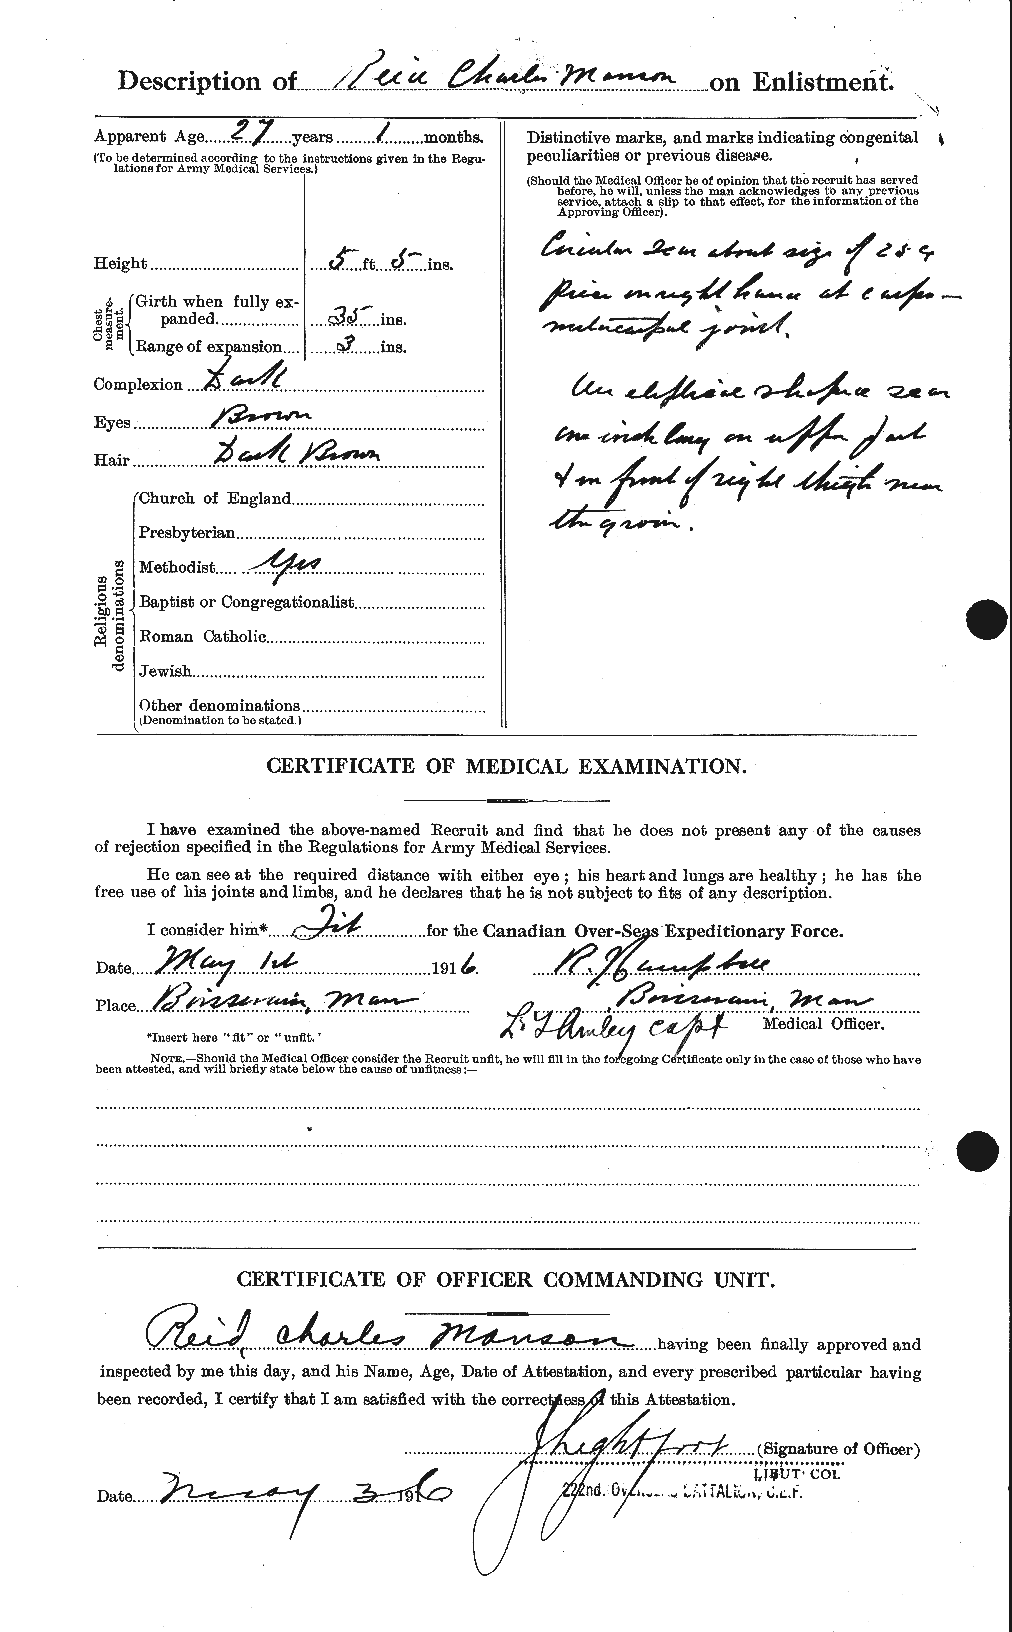 Personnel Records of the First World War - CEF 597896b